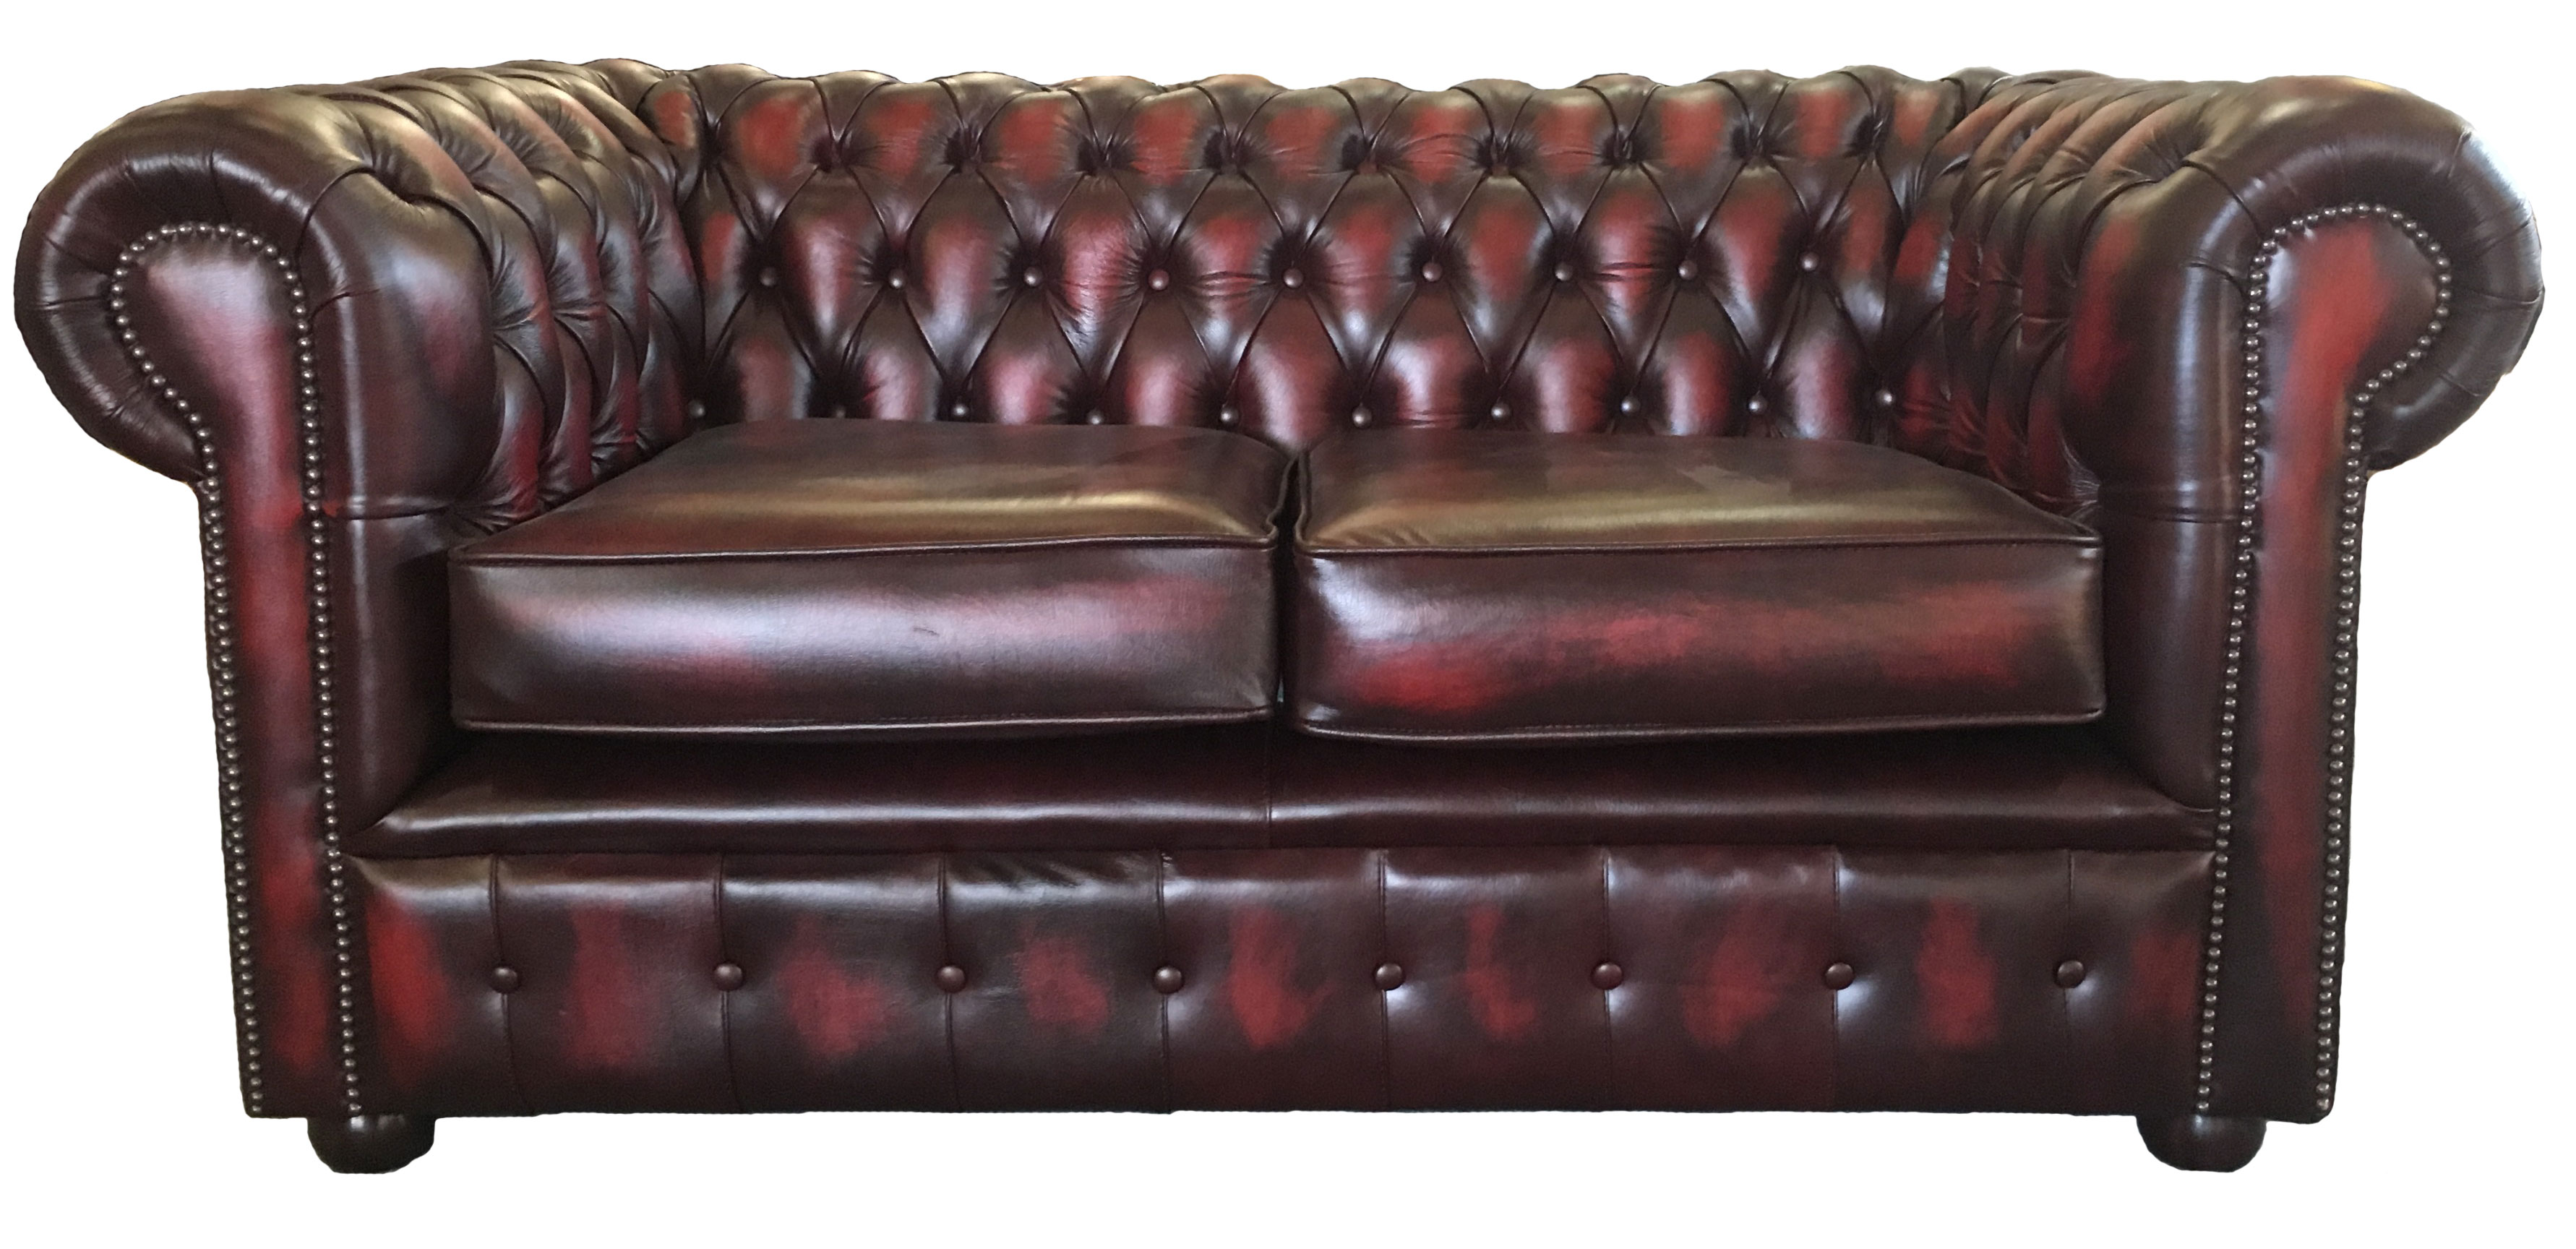 dfs sofa sale leather chesterfield